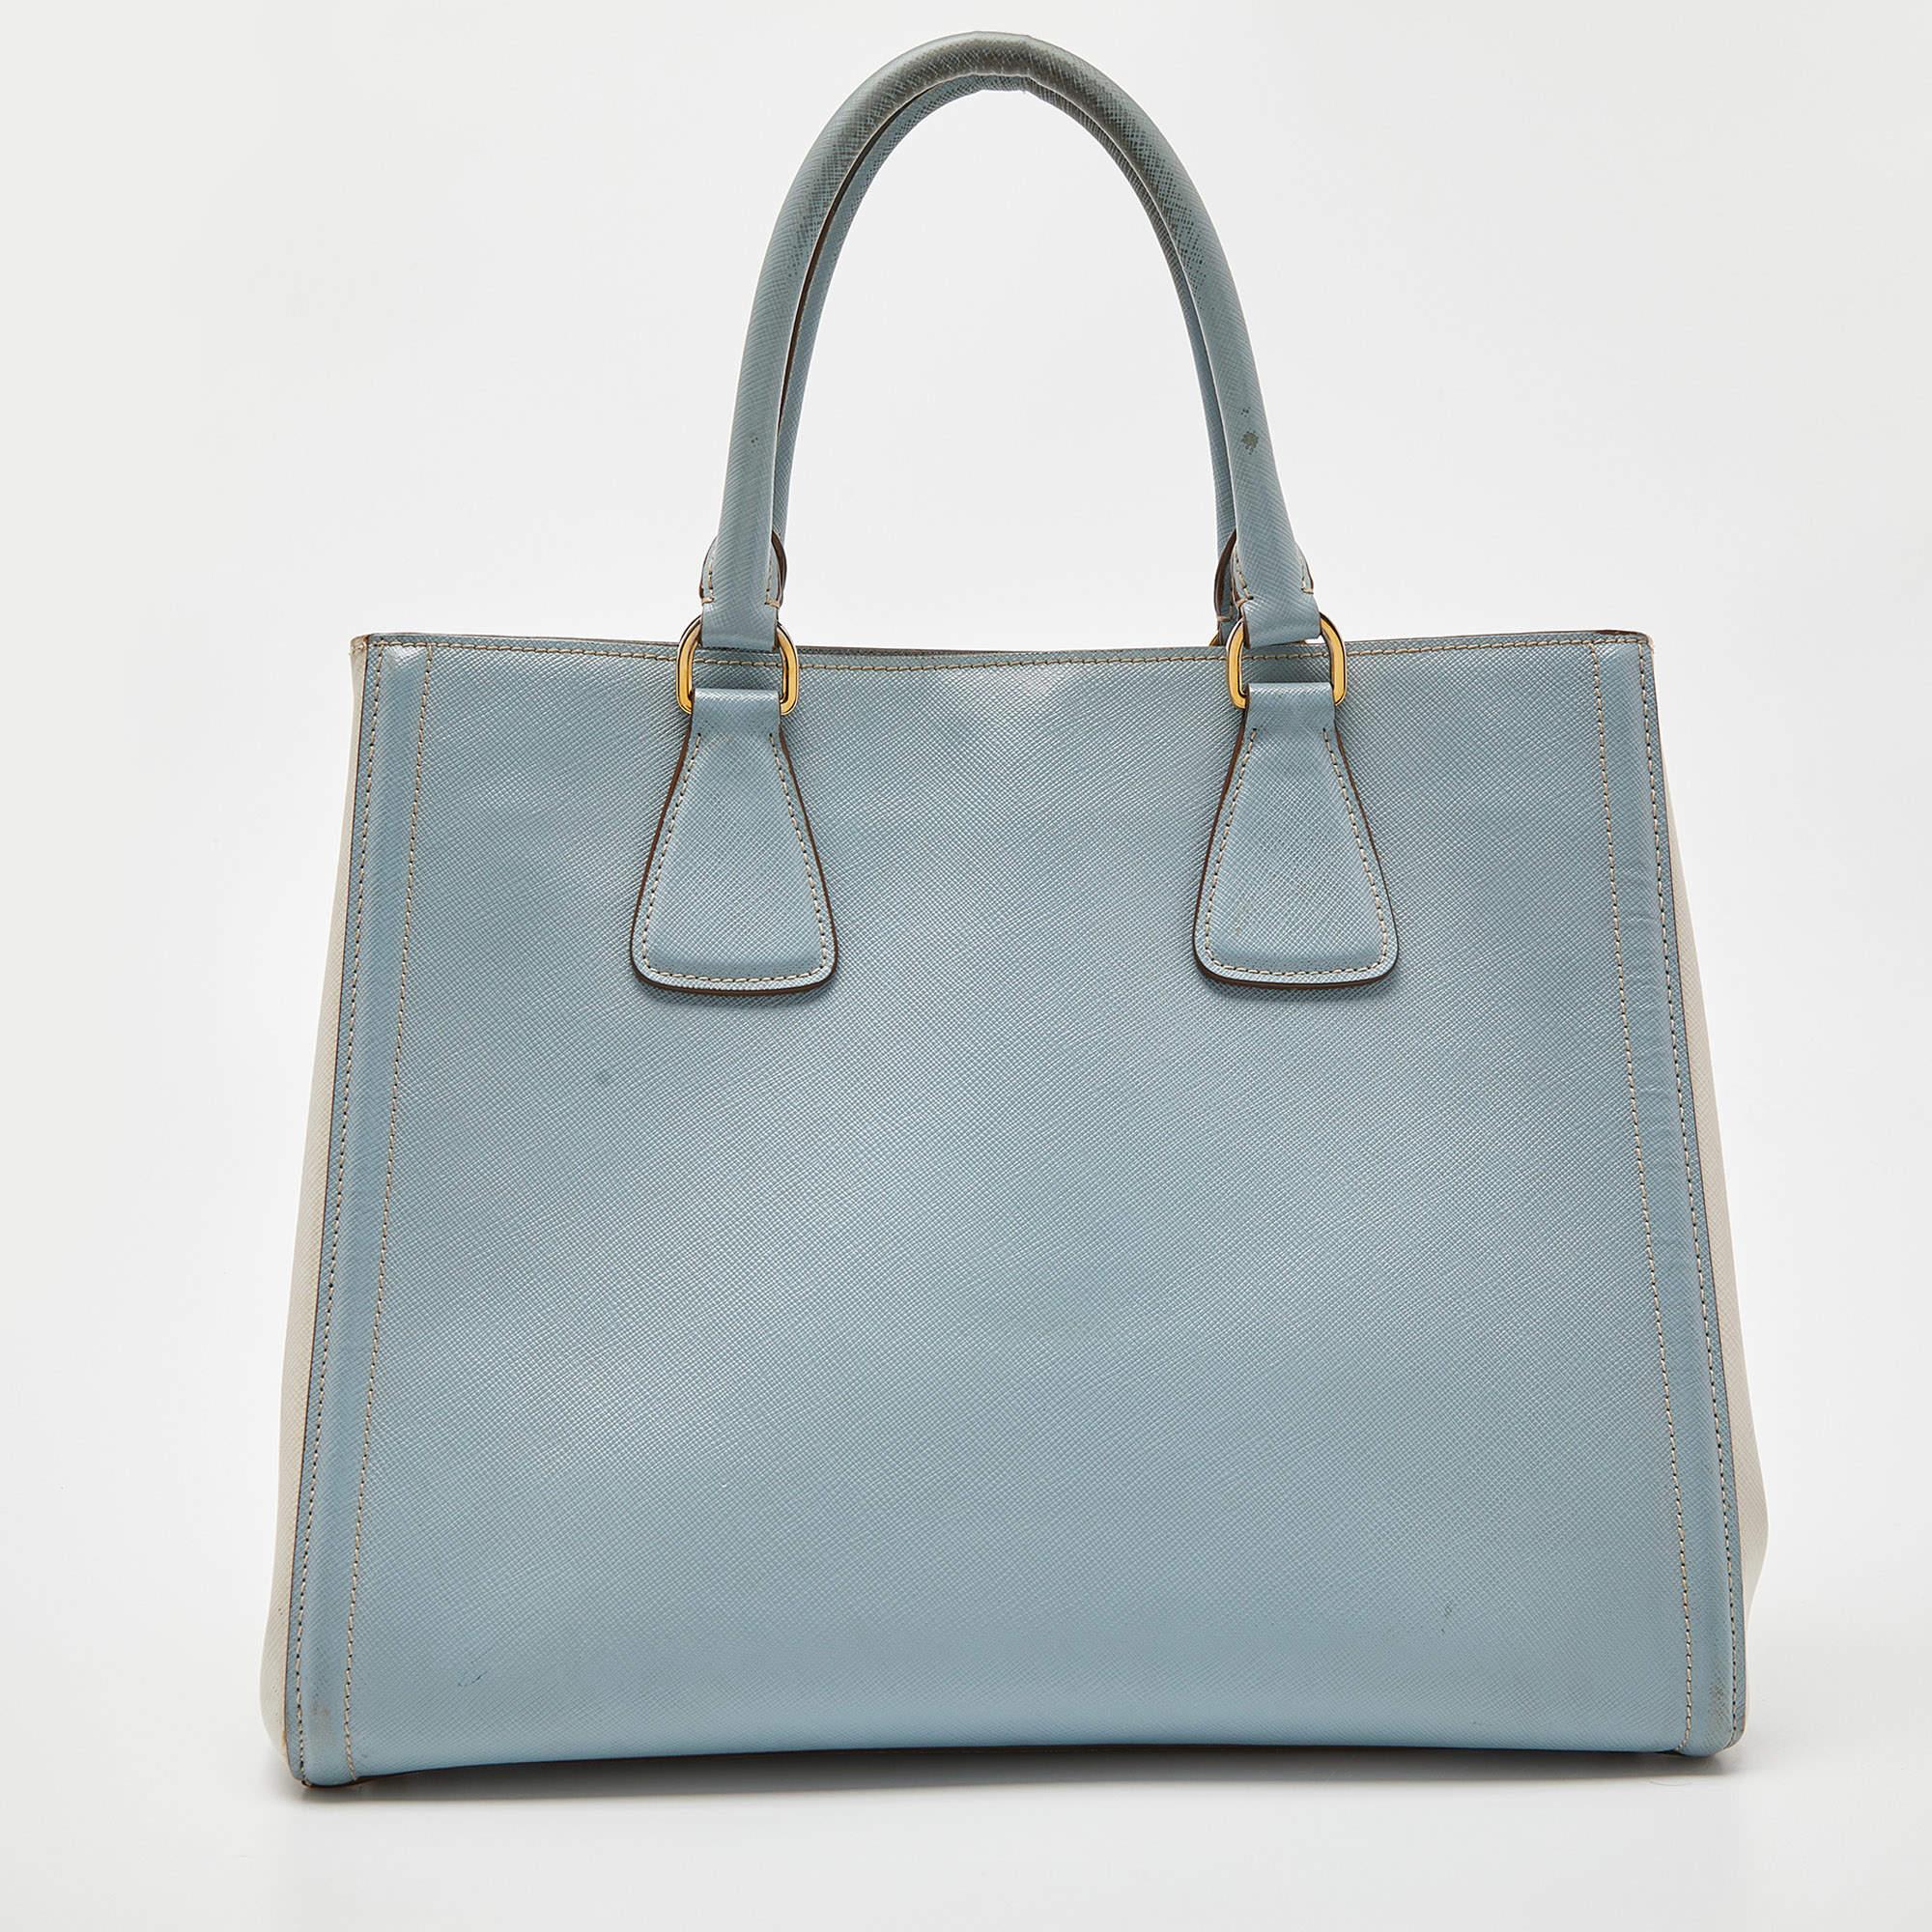 Bringing a mix of timeless fashion and fine craftsmanship is this tote from Prada. The bag comes with a durable Saffiano Lux leather exterior, comfortable handles, shiny hardware, and a capacious interior. Fine elements complete the tote in a luxe